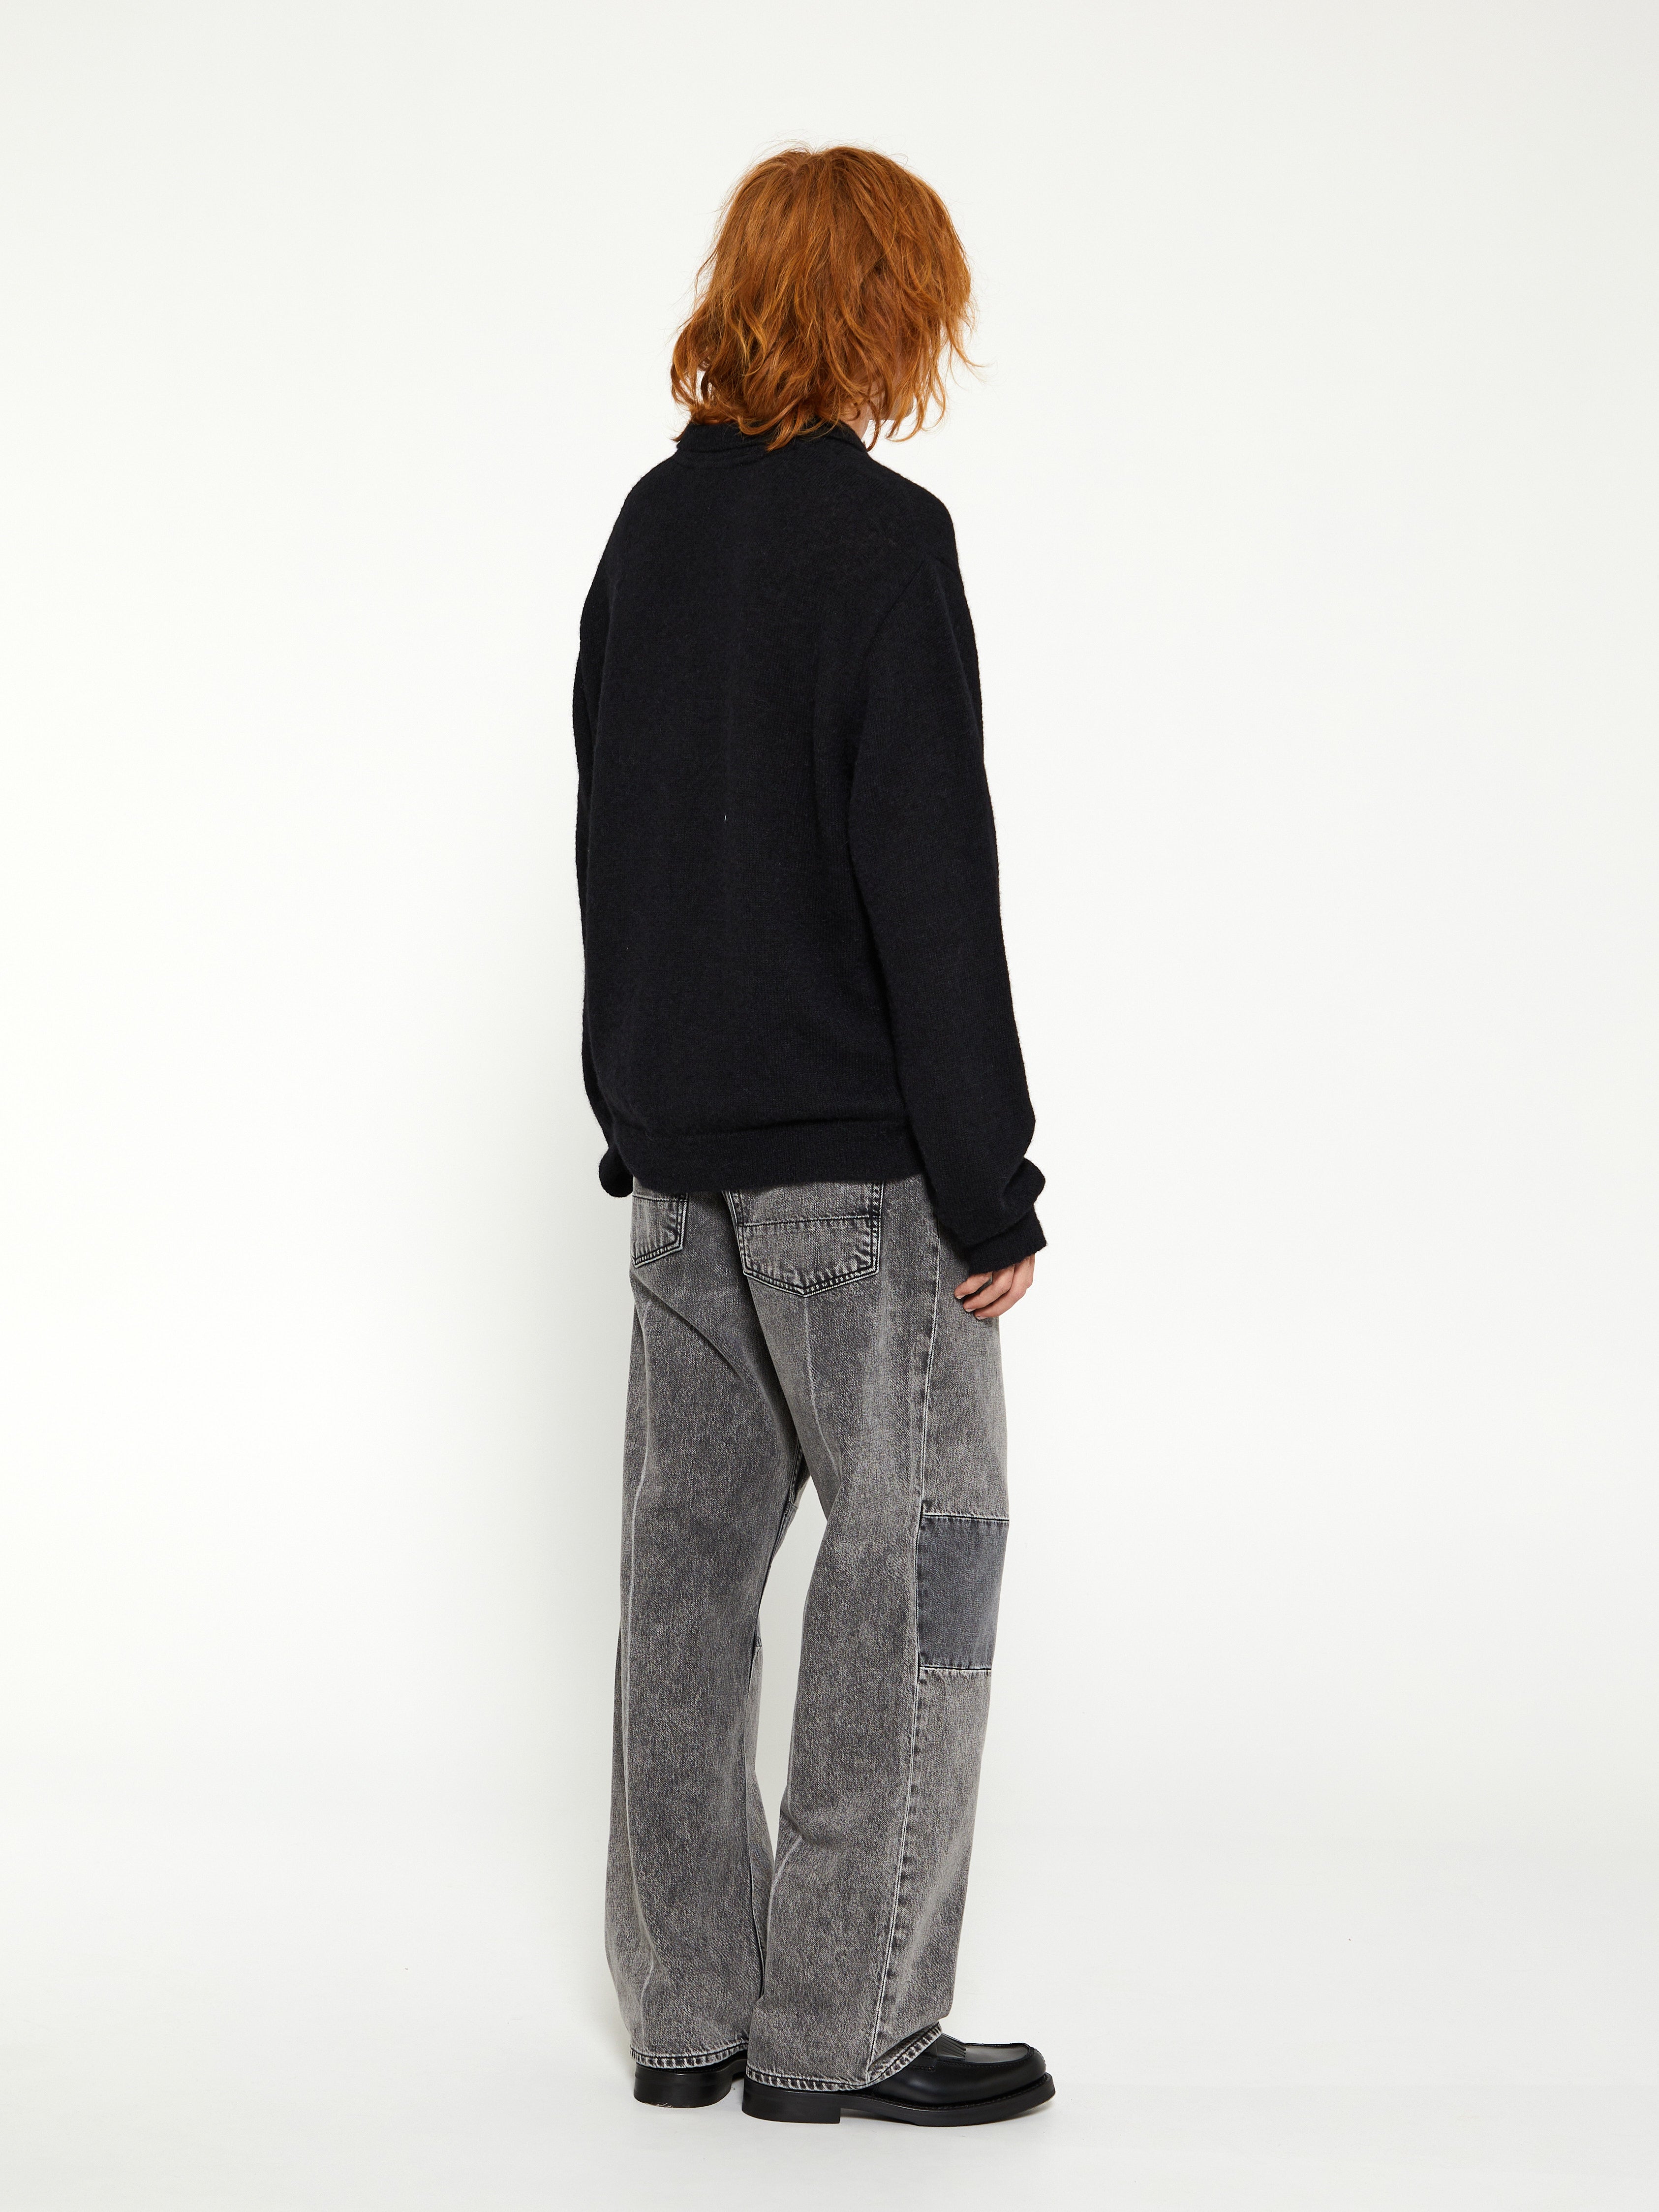 Extended Third Cut Jeans in Black and Grey